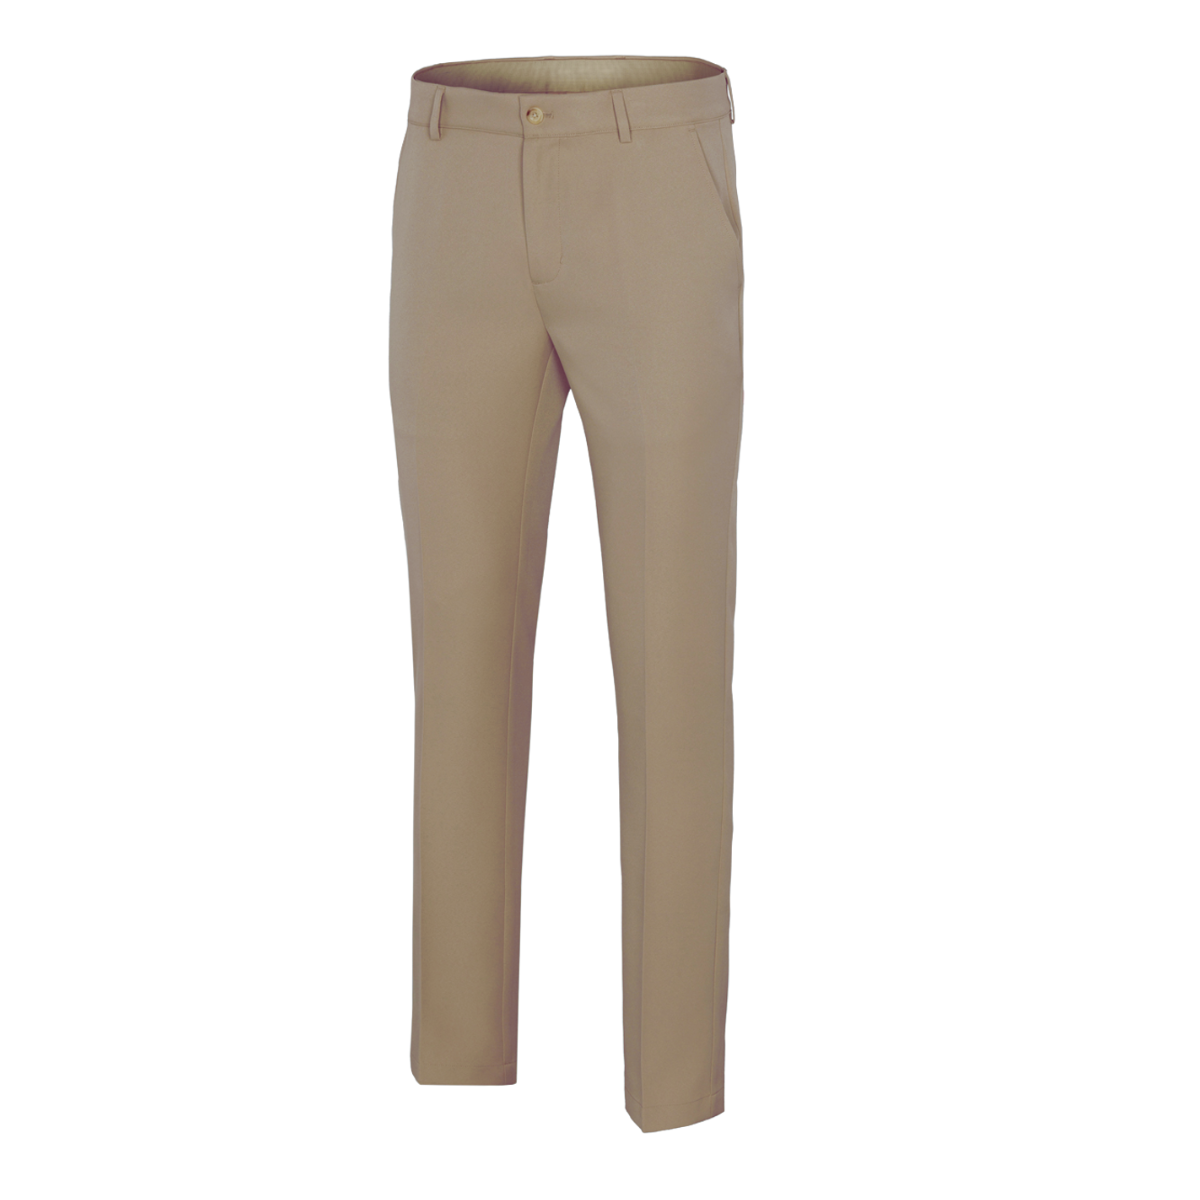 Greg Norman Play Dry Heather Collection Golf Trousers (US Size)